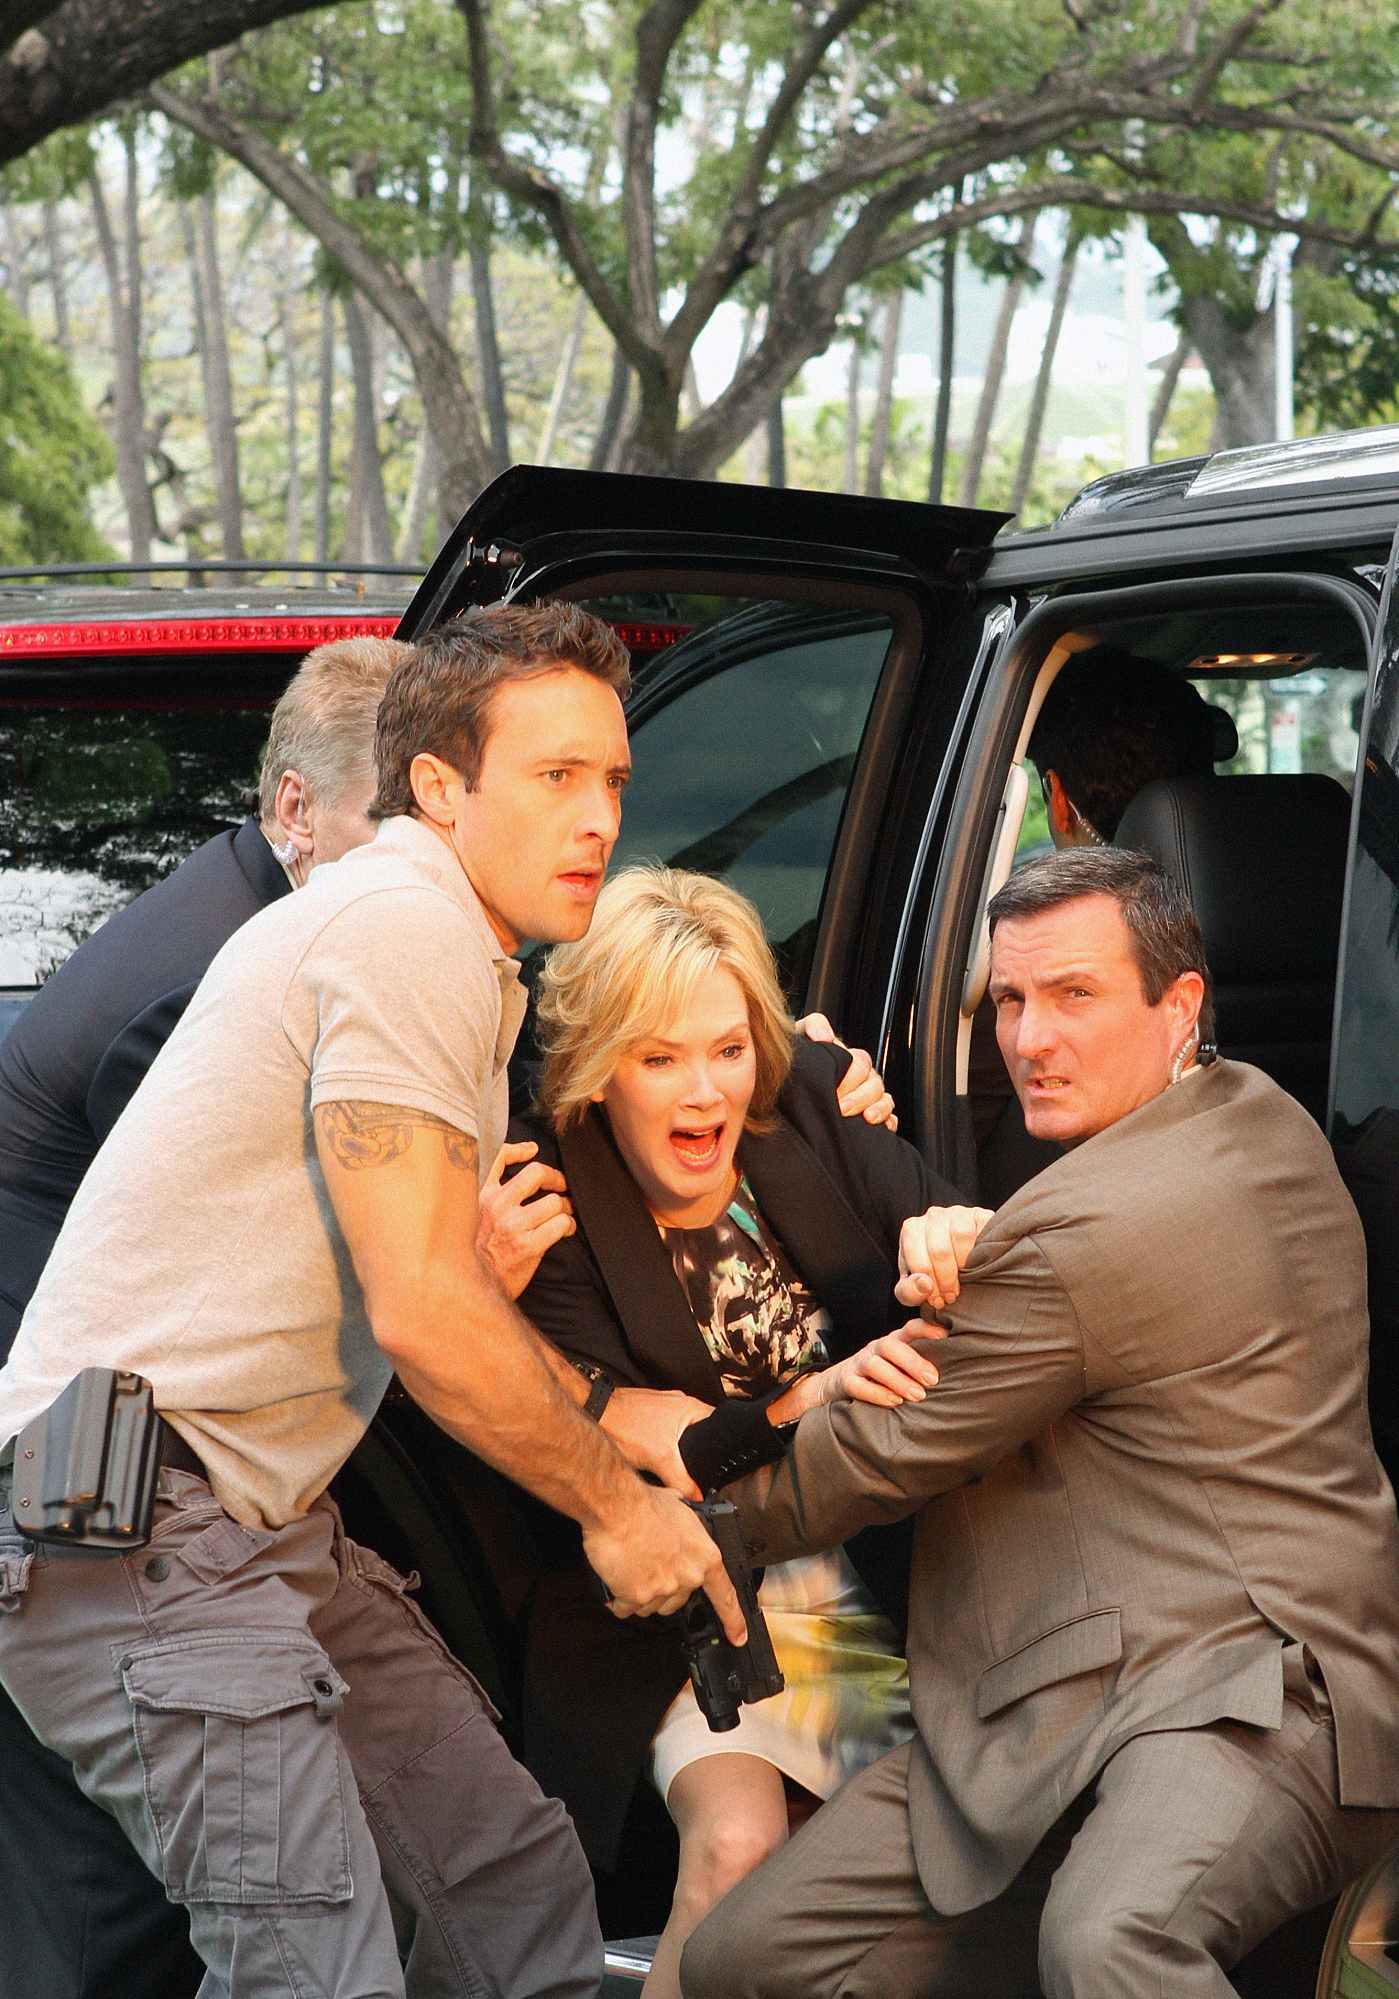 Still of Jean Smart and Alex O'Loughlin in Hawaii Five-0 (2010)